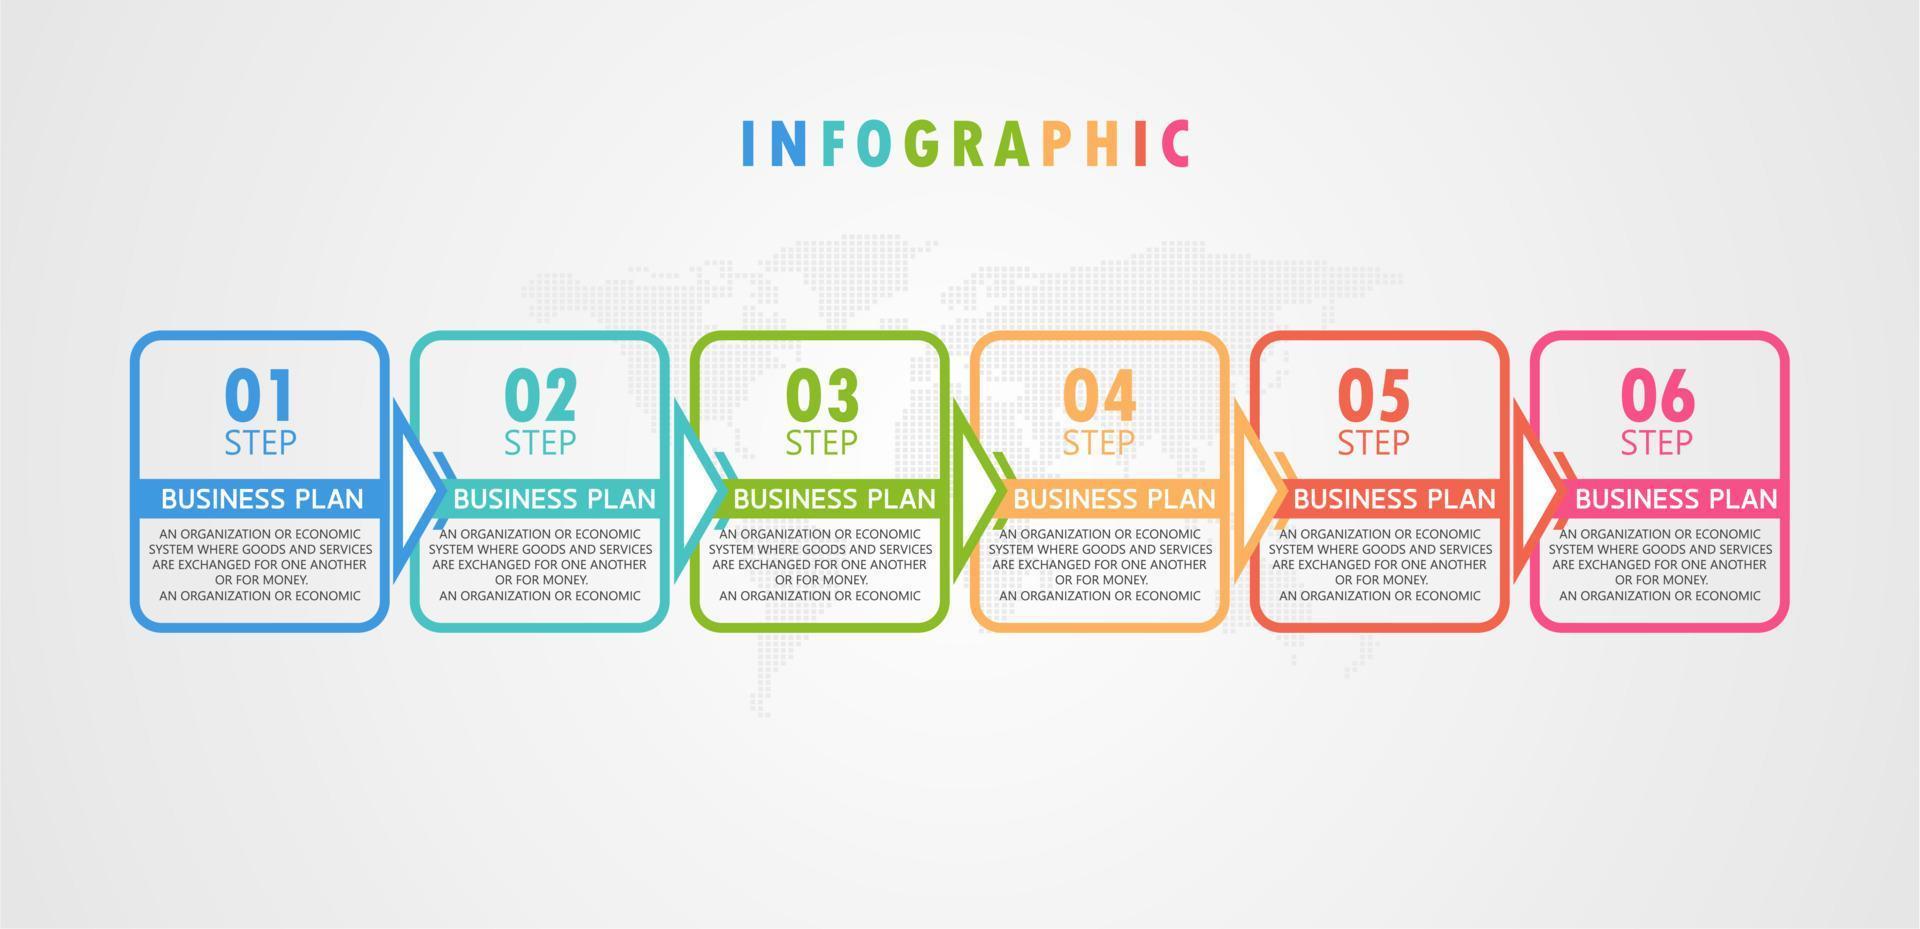 vector infographic label template with icon options or steps infographics for business ideas presentations It can be used for information graphics, presentations, websites, banners, print media.